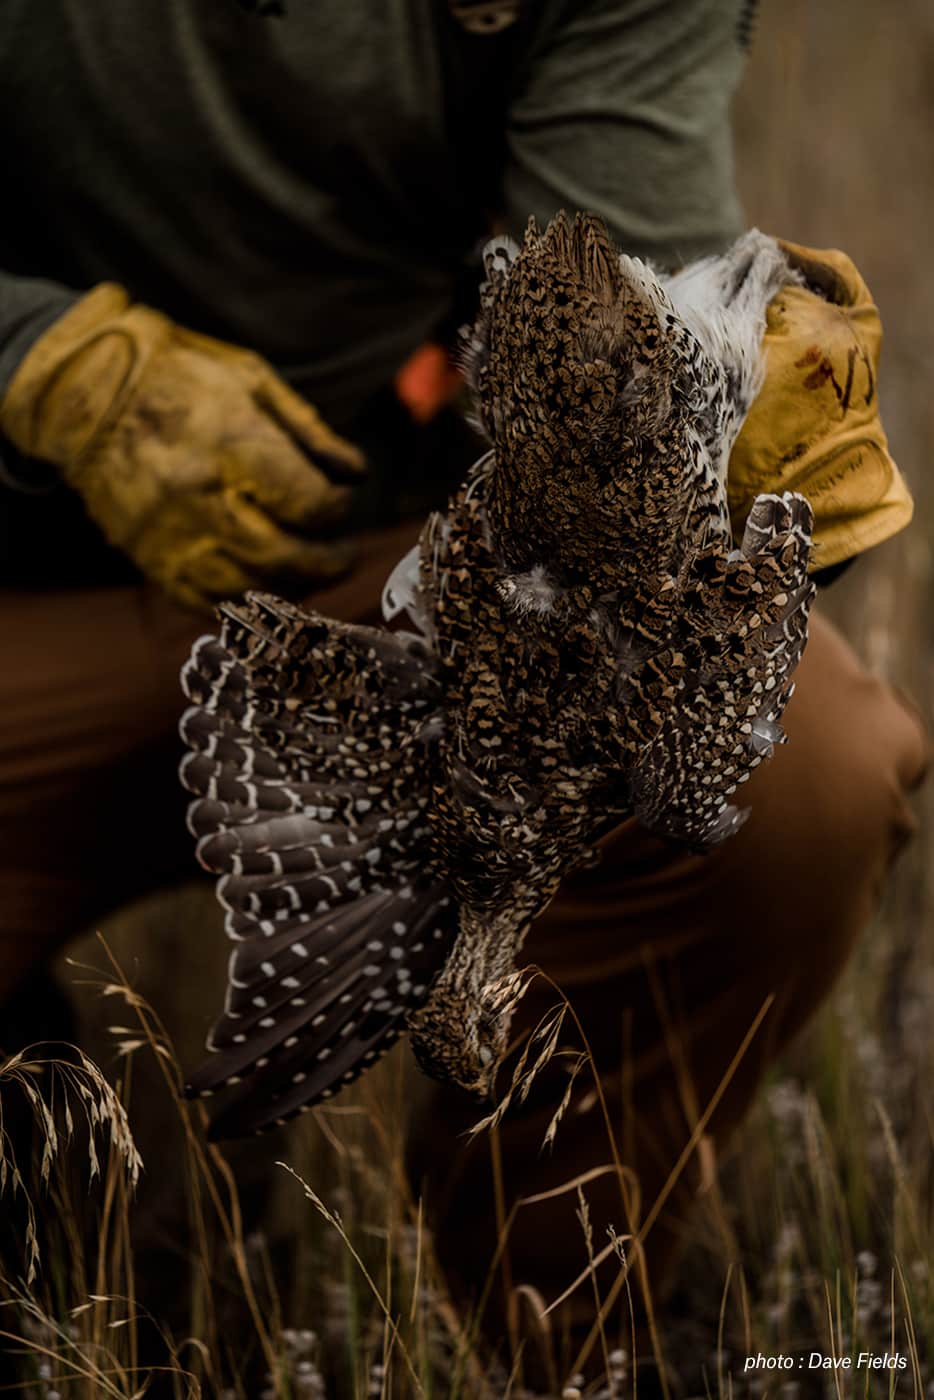 A hunter wearing gloves holds a grouse.